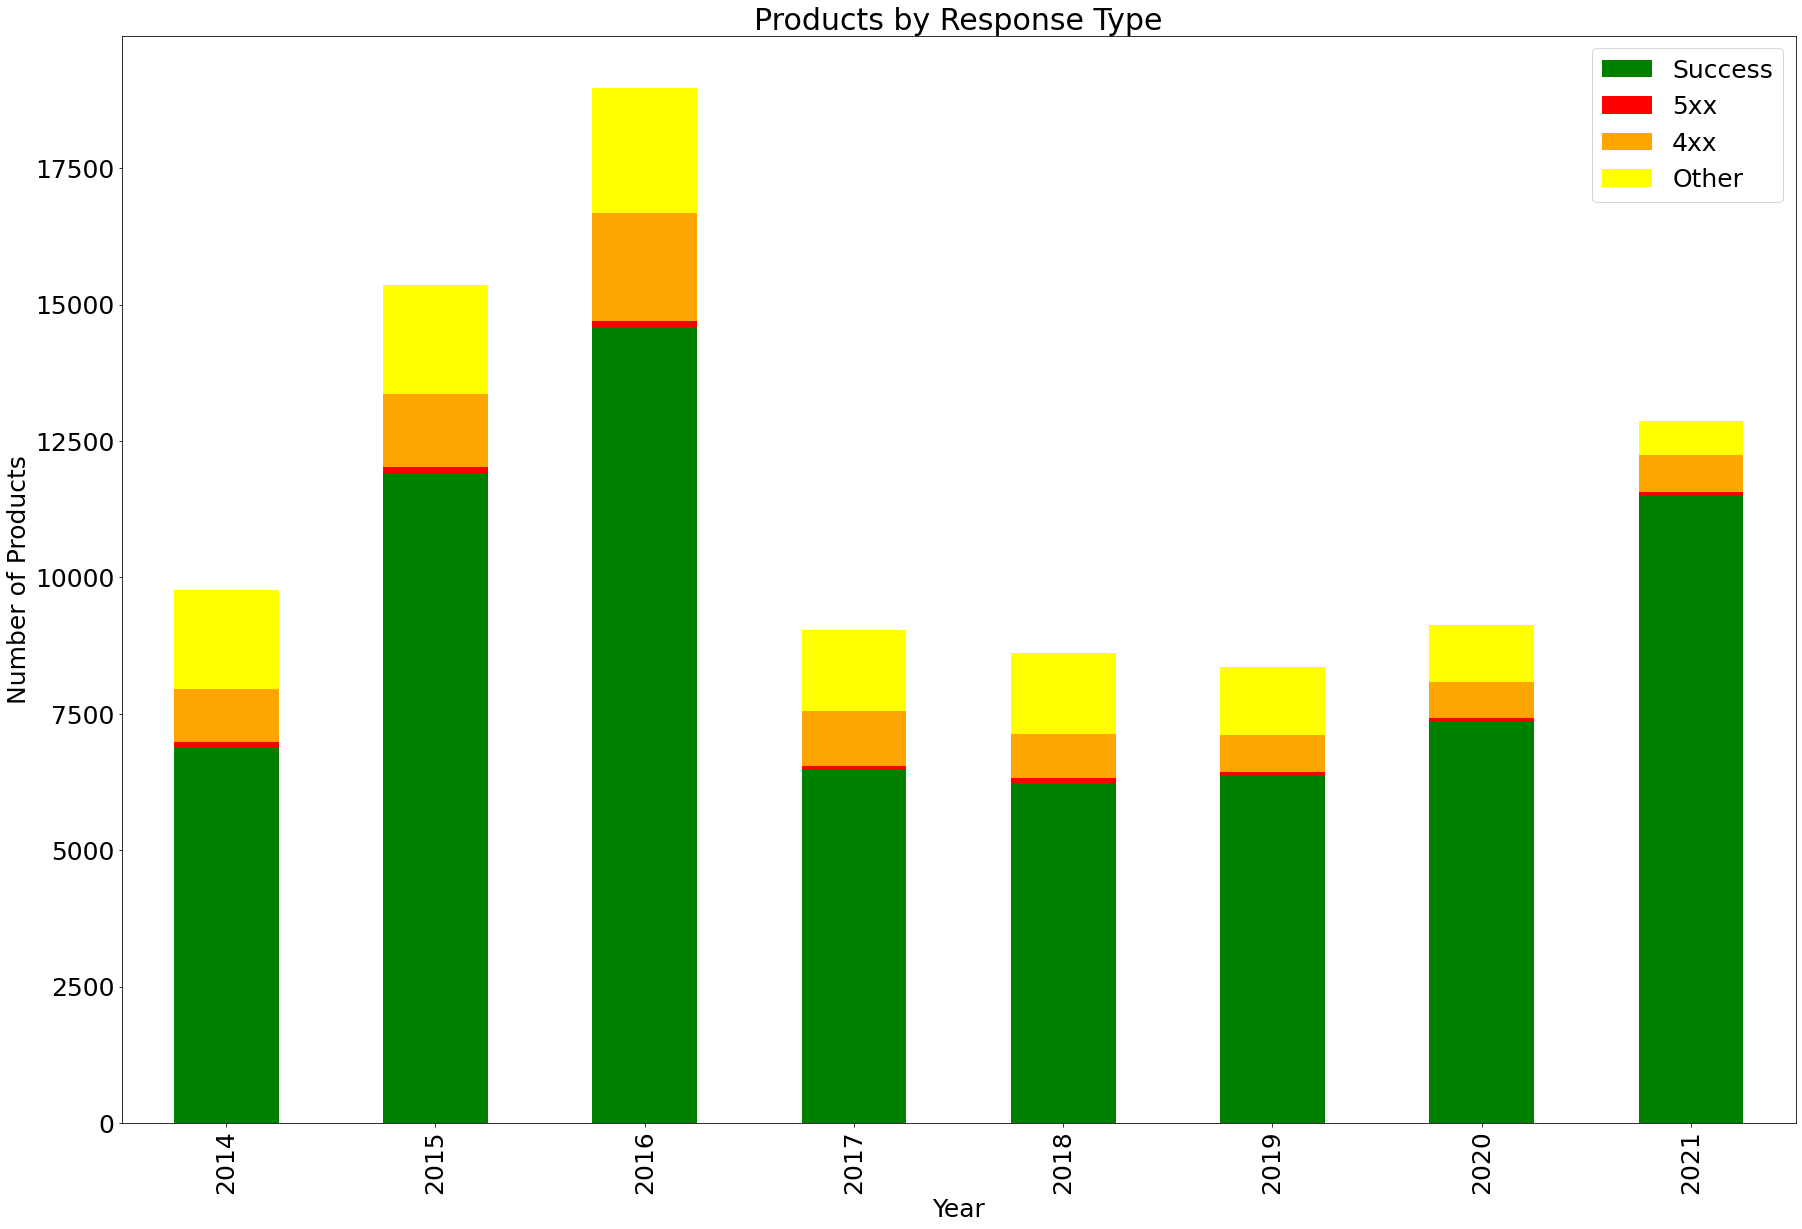 Products by Response Type